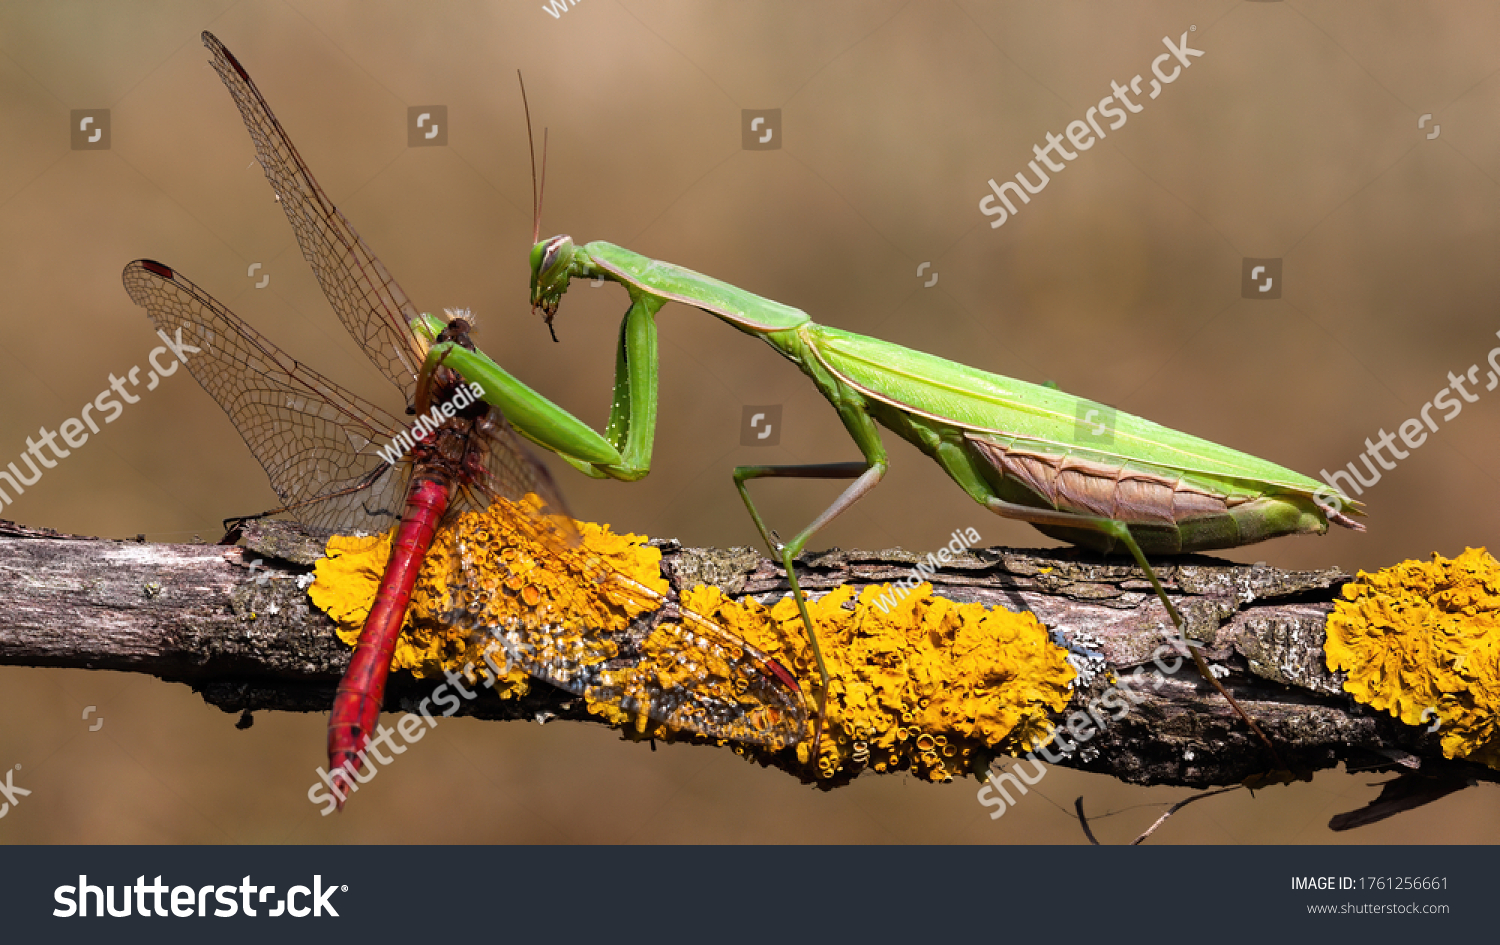 Green european mantis, mantis religiosa, feeding on red dragonfly in summer nature. Predator insect hunting on branch. Wild animal in natural environment. #1761256661